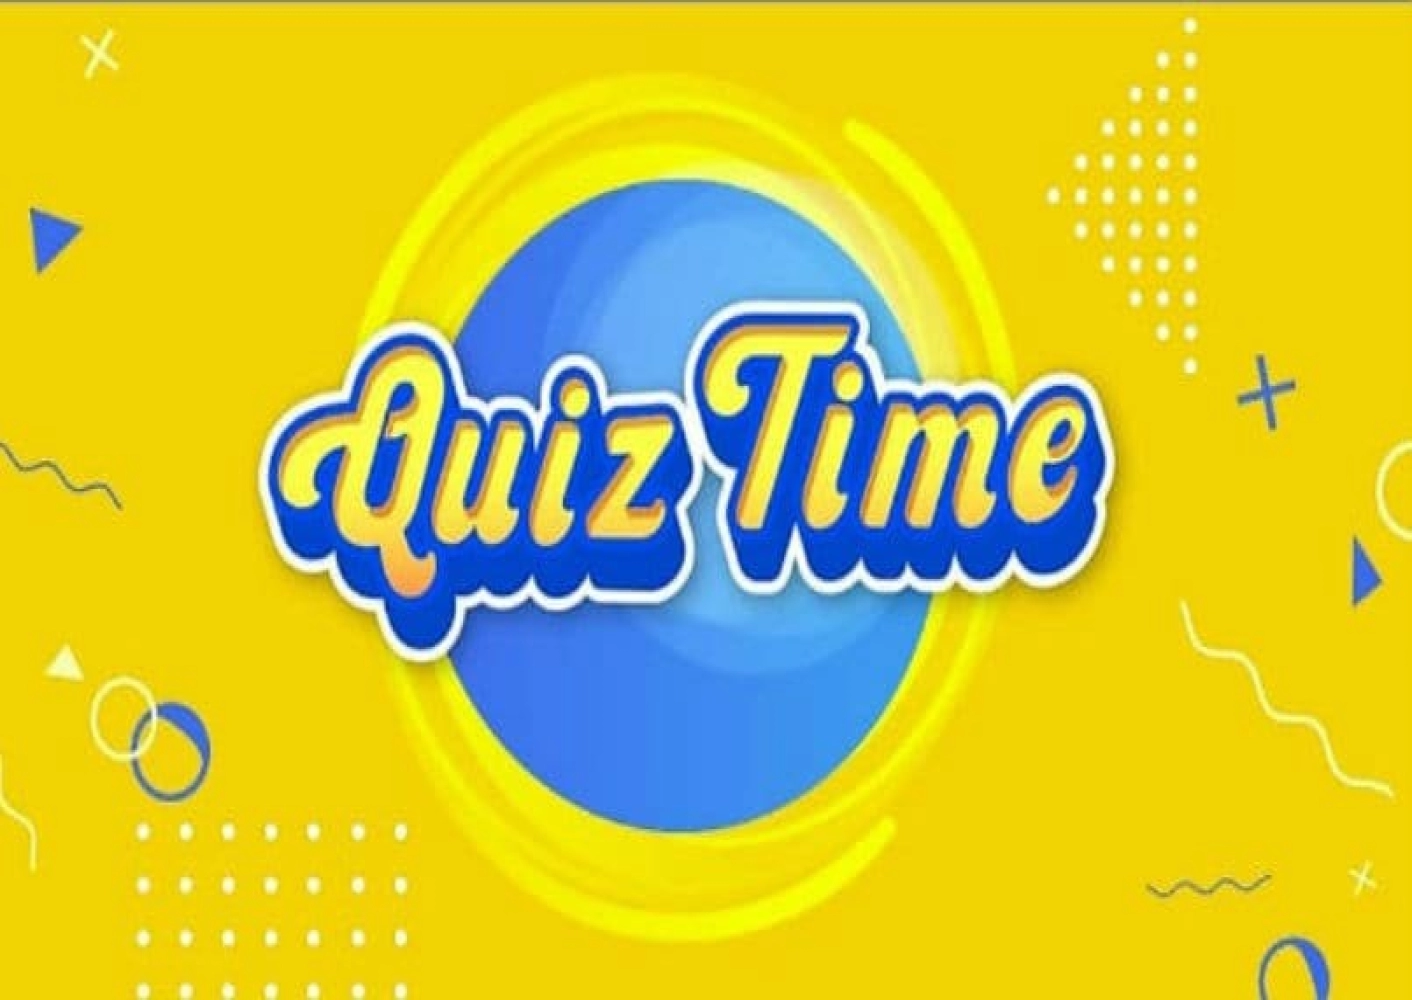 FLIPKART QUIZ: DAILY LIVE NOW, ANSWERS LEAKED 9, JAN, 2021